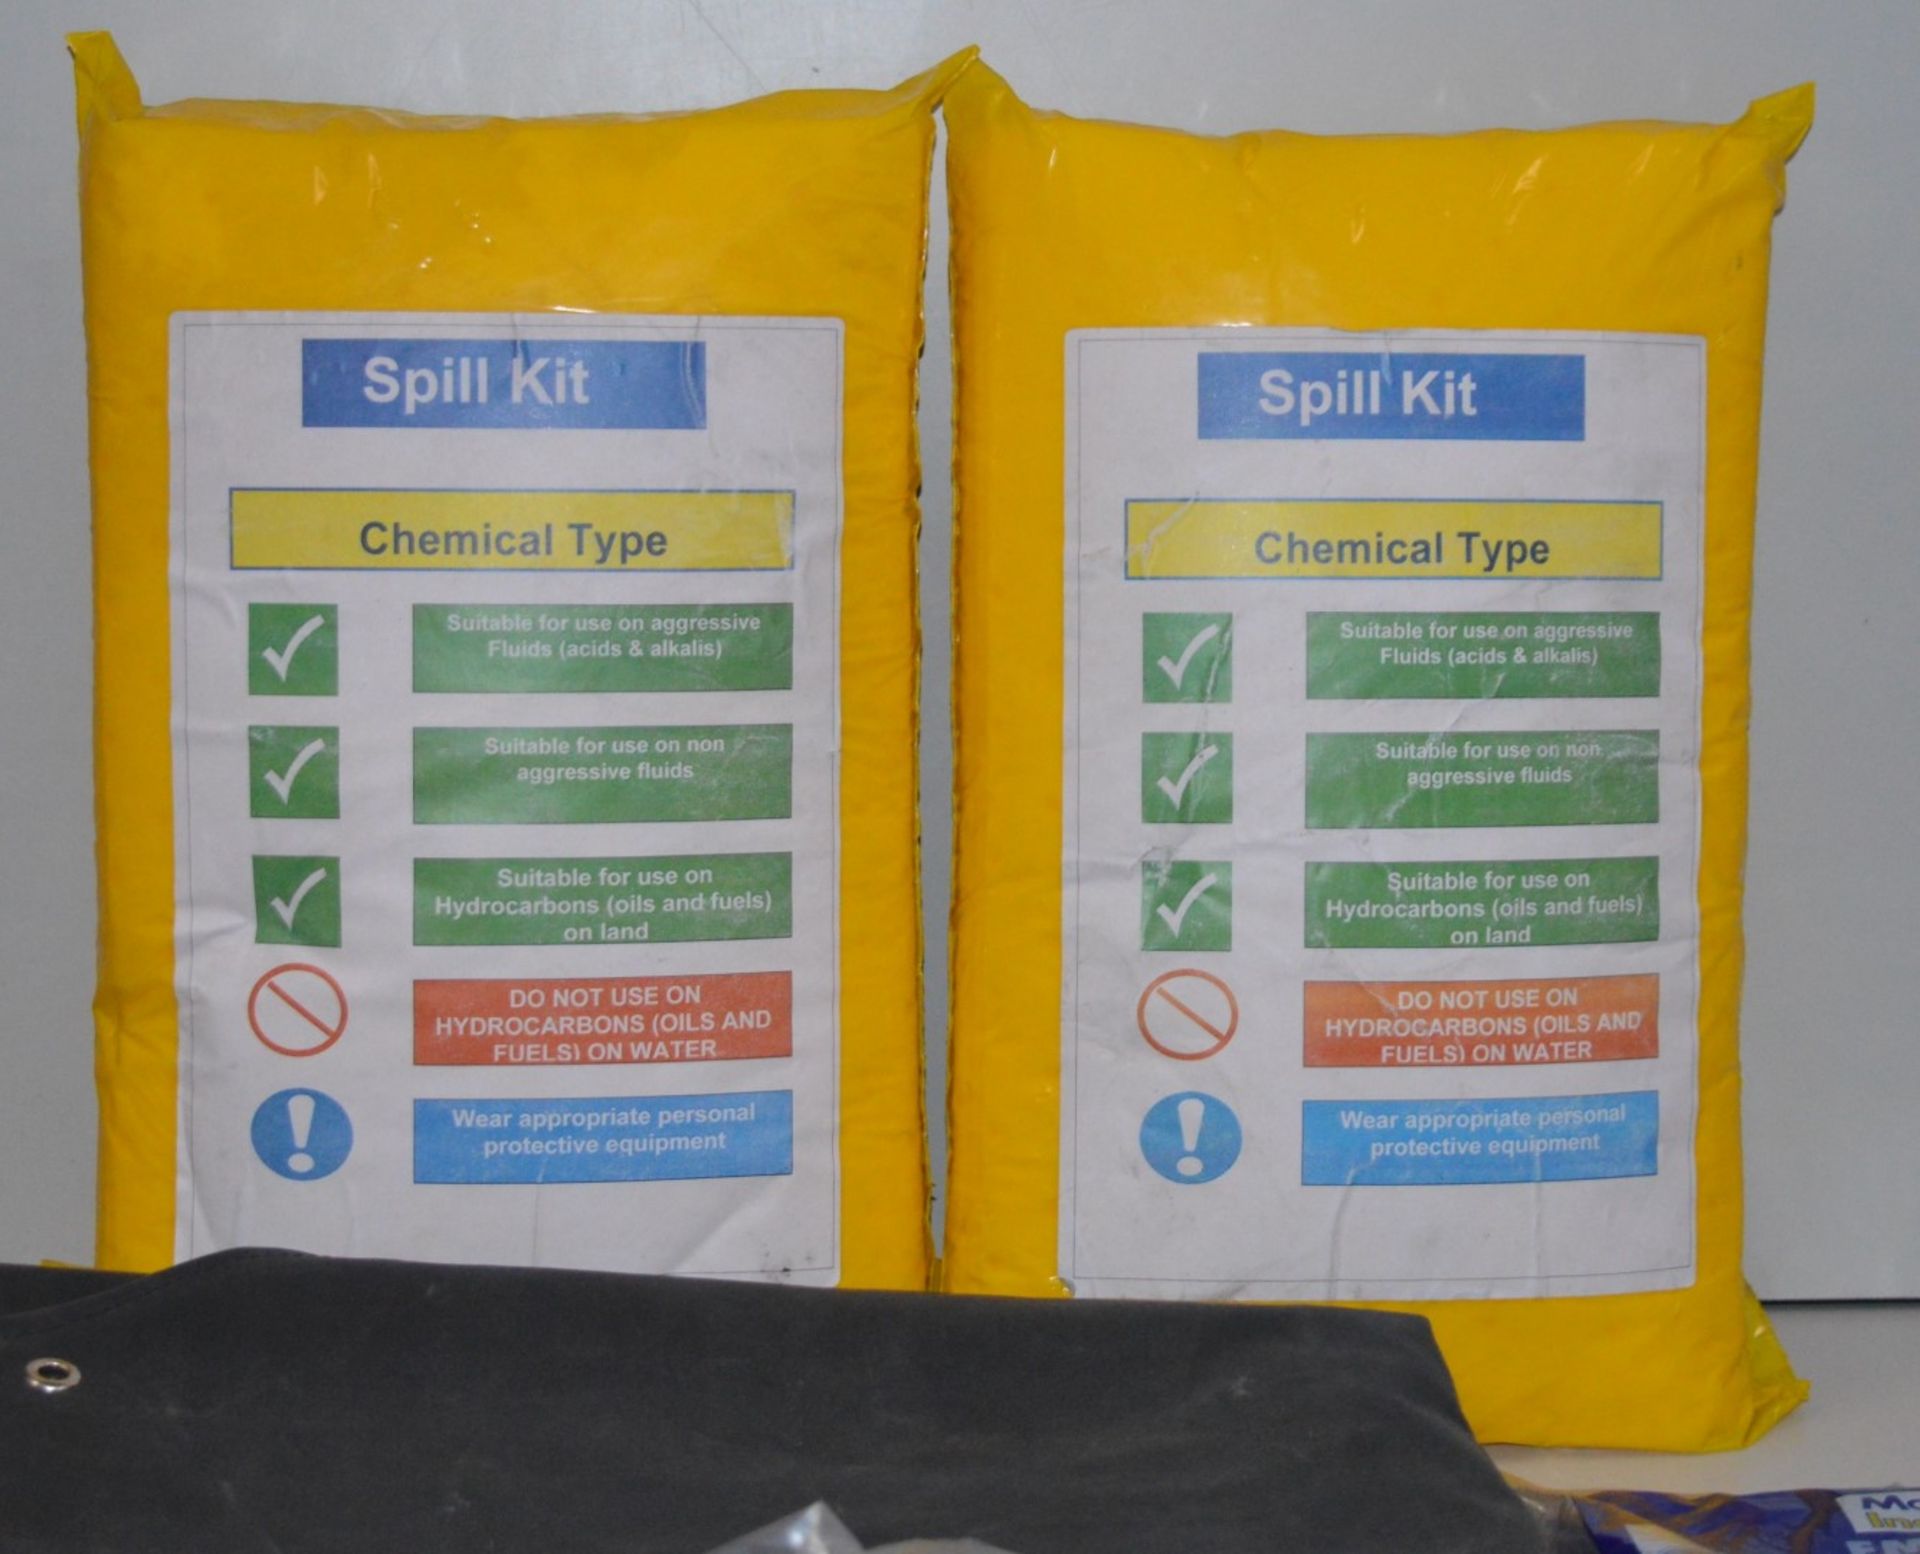 1 x Assorted Collection of Spill Kit Consumables - Includes 2 x Chemical Spill Kits, 1 x Emeror - Image 2 of 8